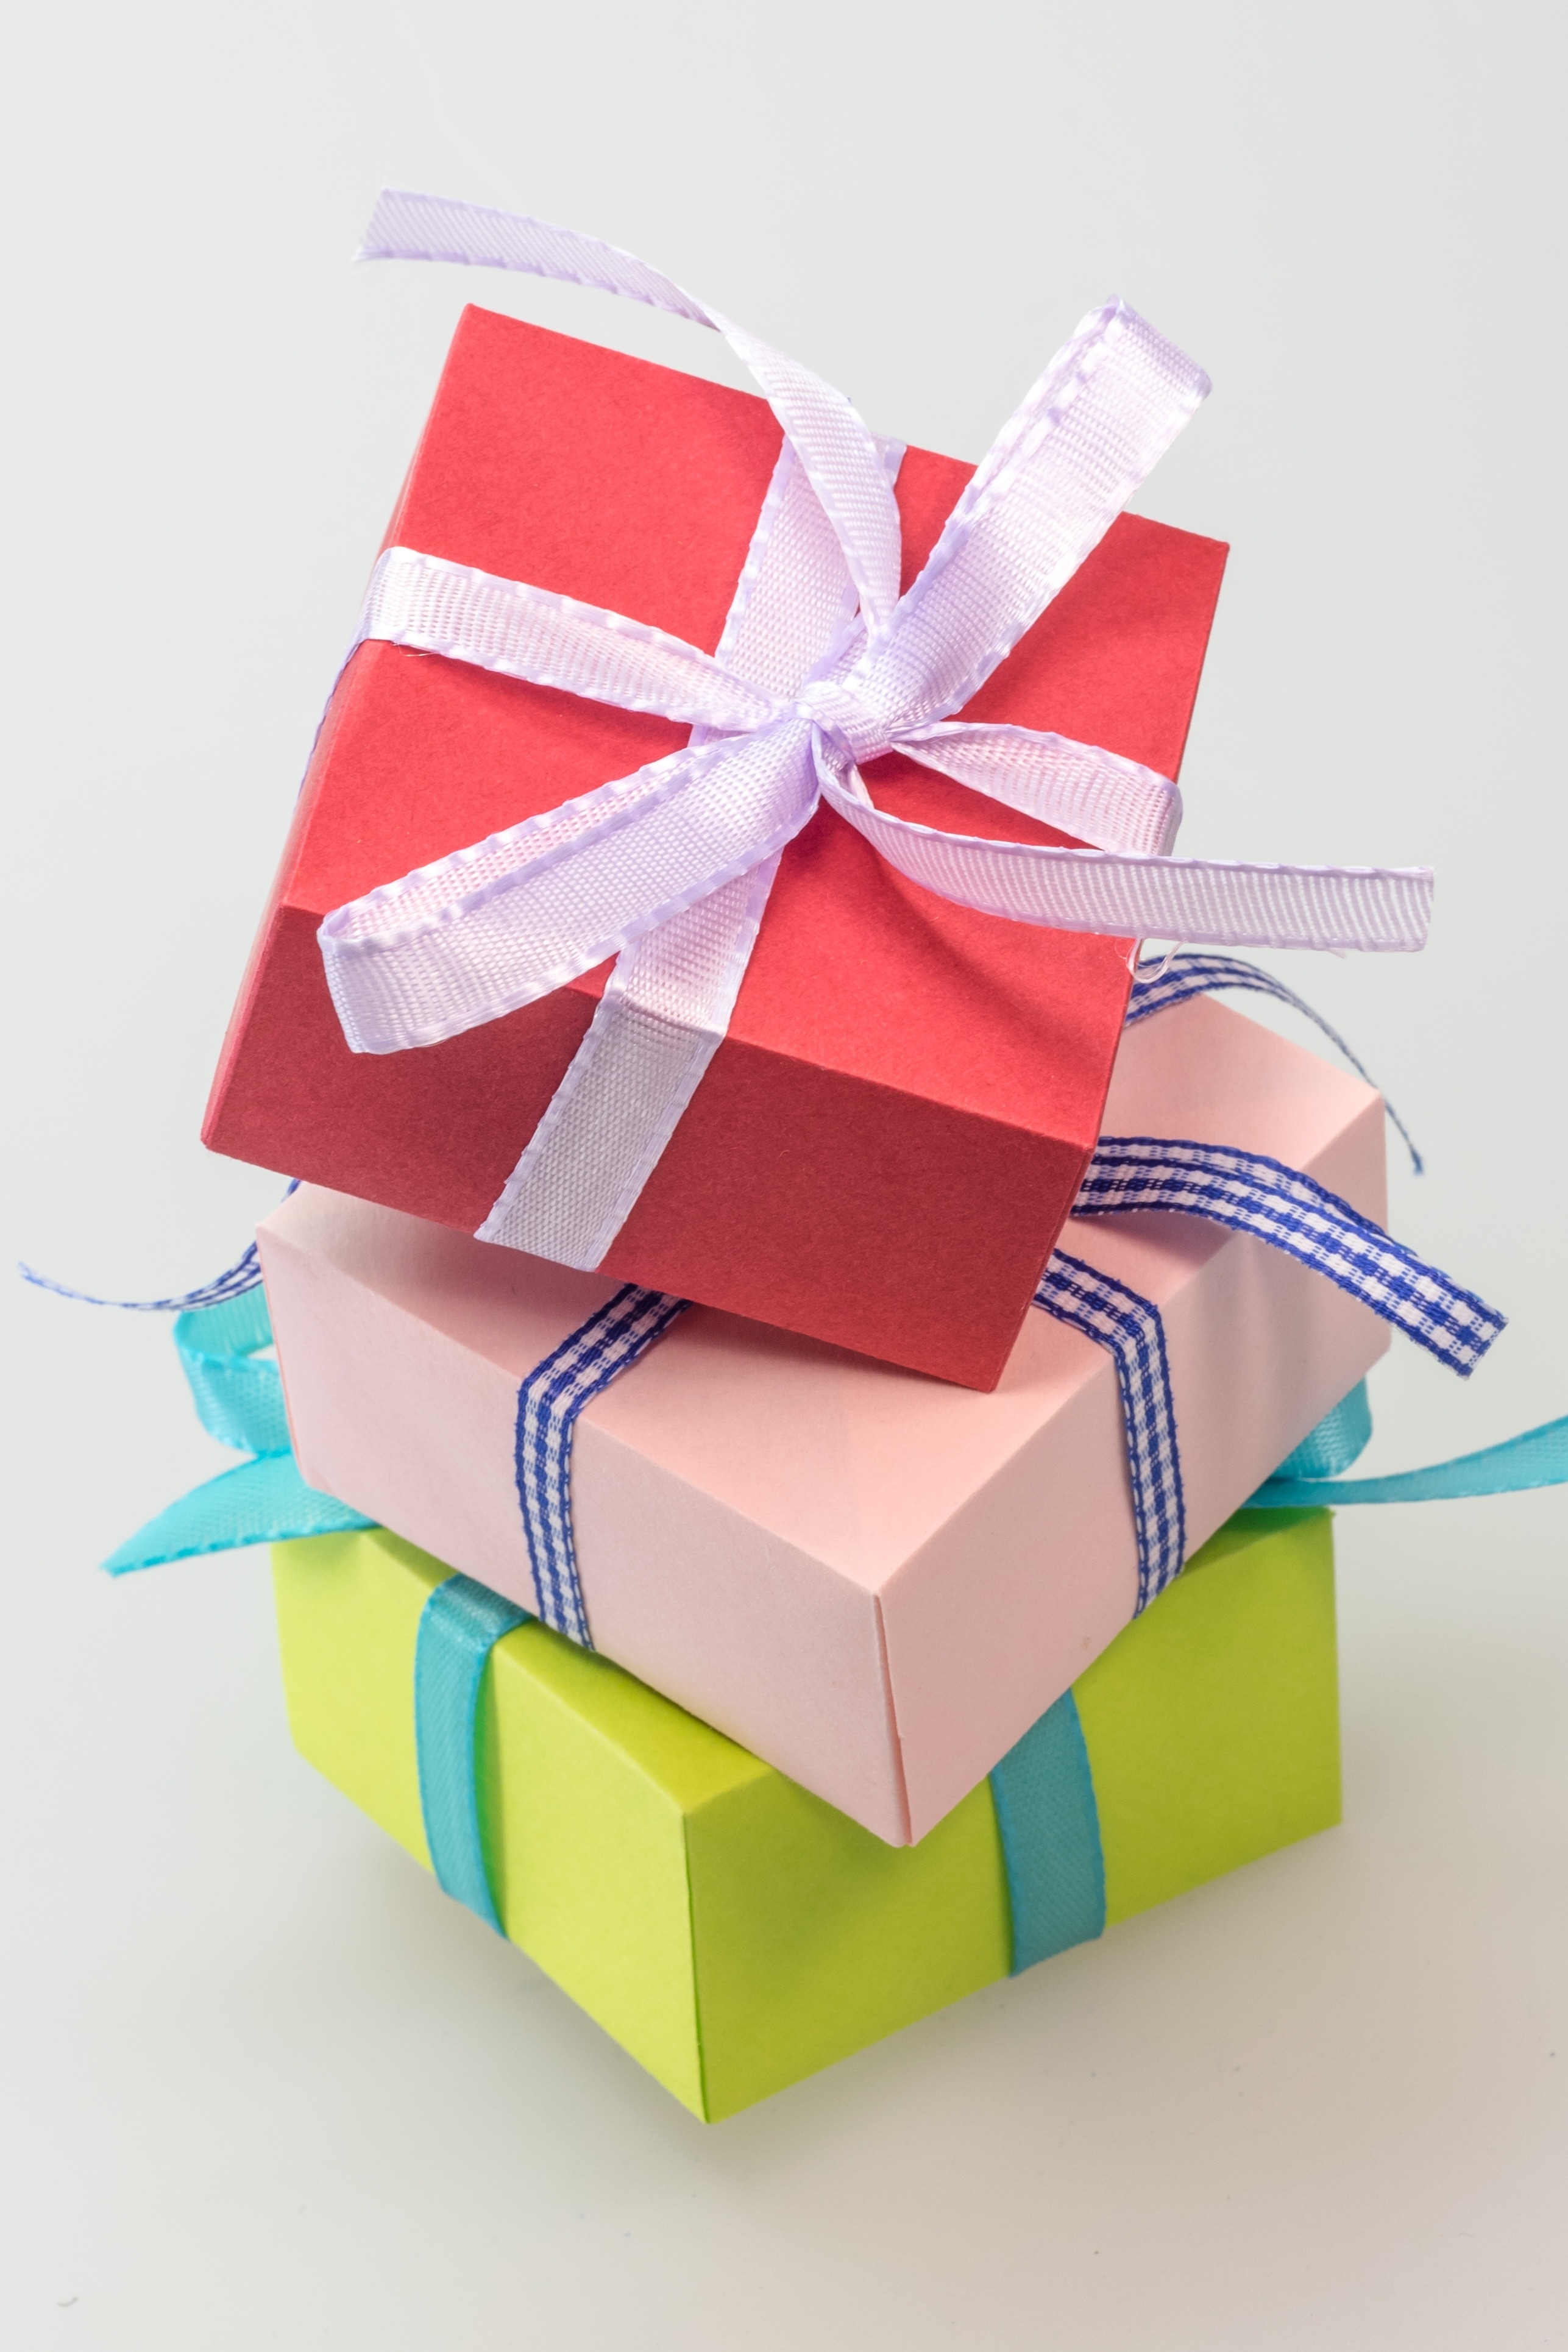 3 gift boxes